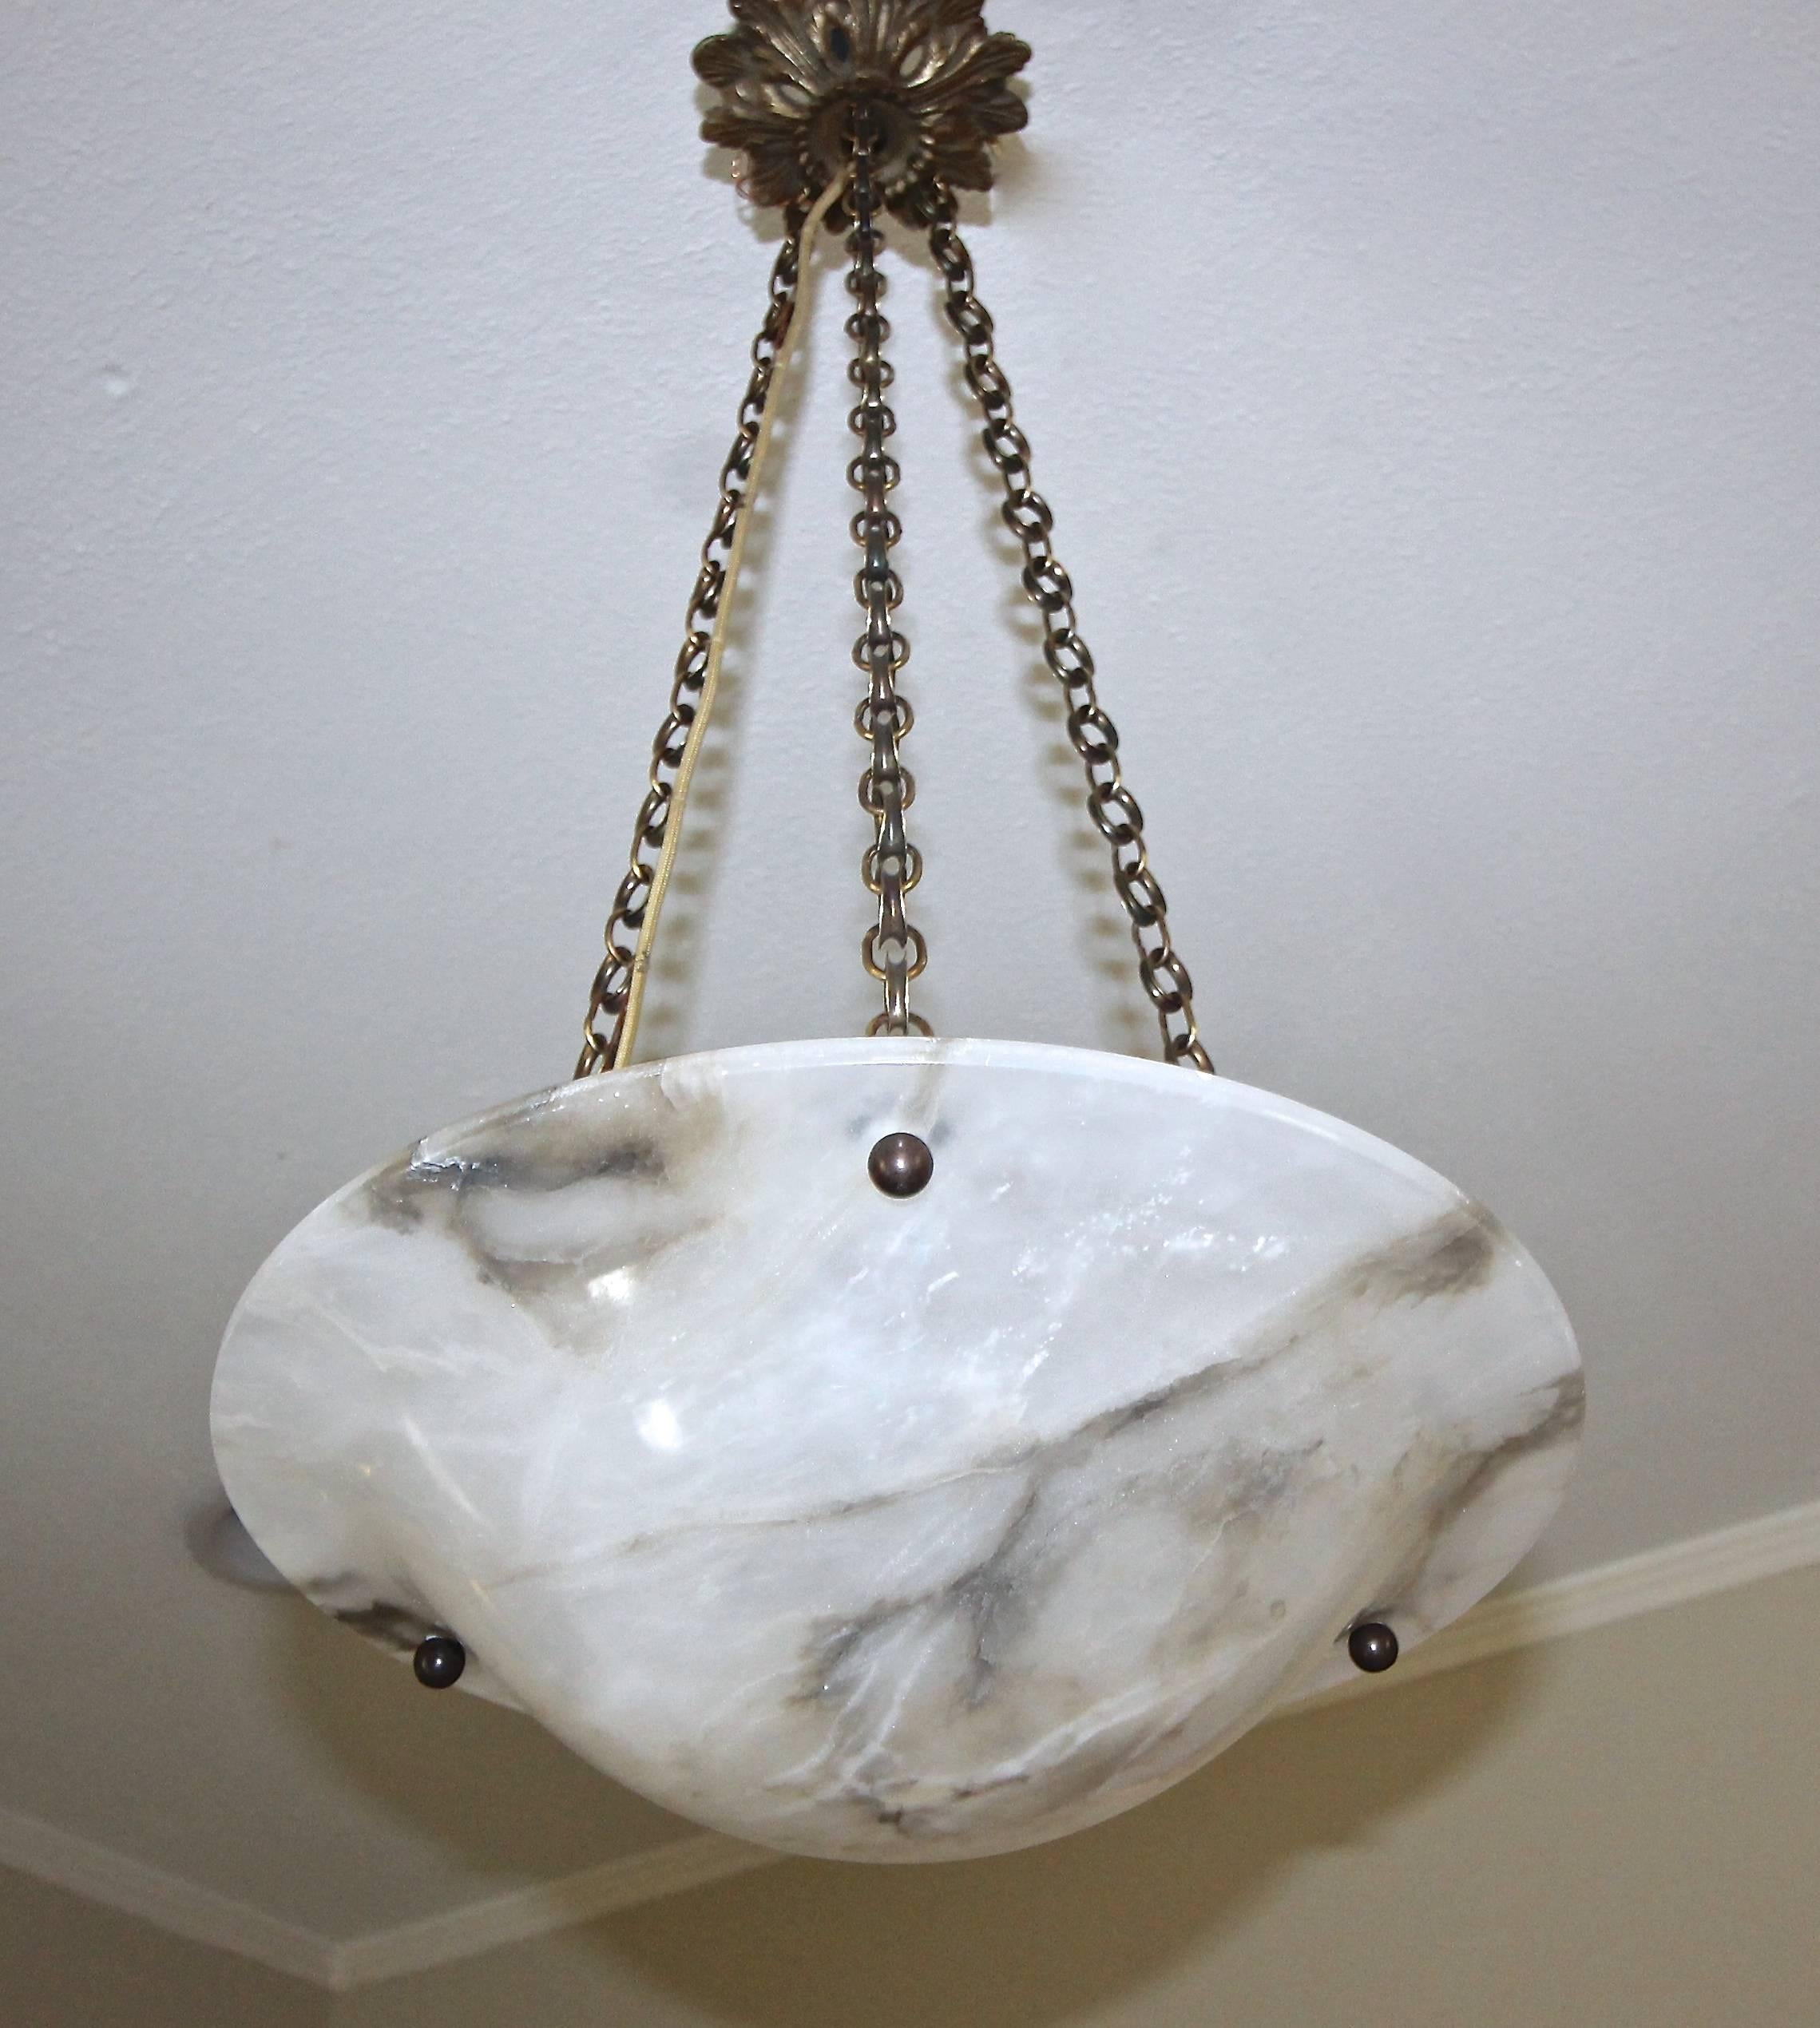 French Louis XV style alabaster pendant or ceiling light with a semi translucent white alabaster bowl with grey veining. Fixture has decorative bronze fittings and ceiling cap. Fixture uses one regular size A or Edison base bulb. Newly wired for